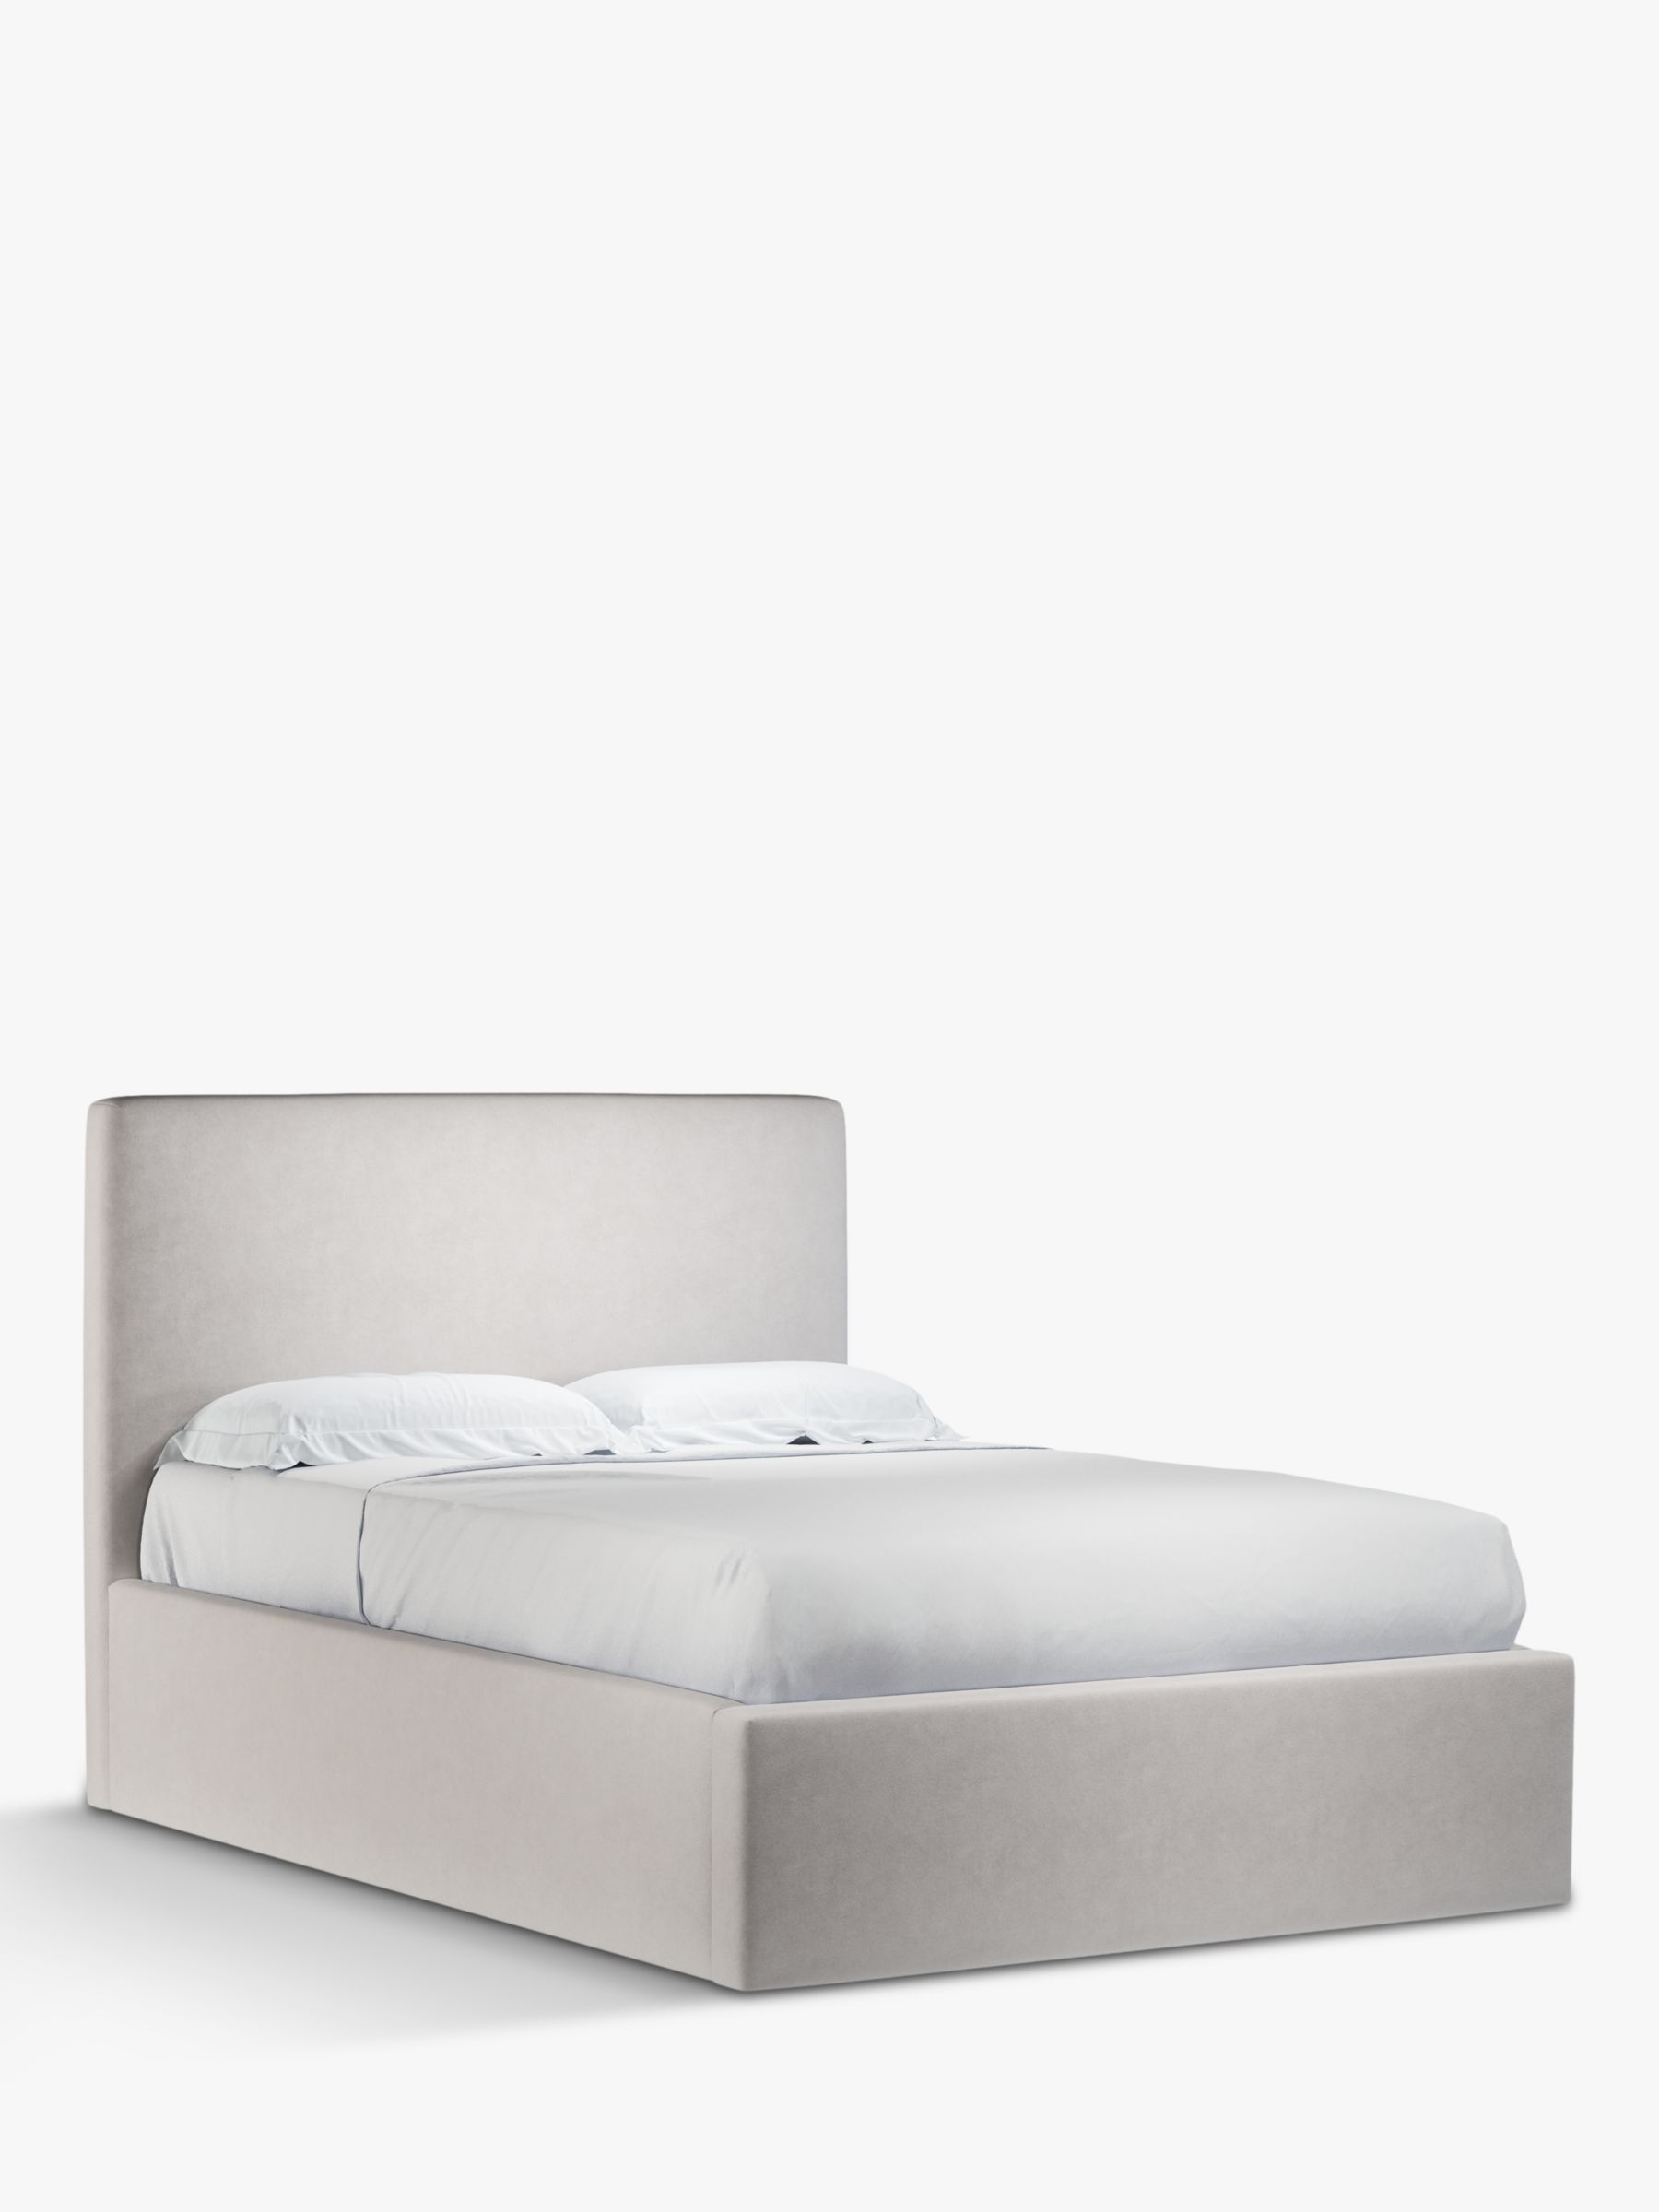 John Lewis & Partners Emily Ottoman Storage Upholstered Bed Frame, Double, Aquaclean Harriet Smoke